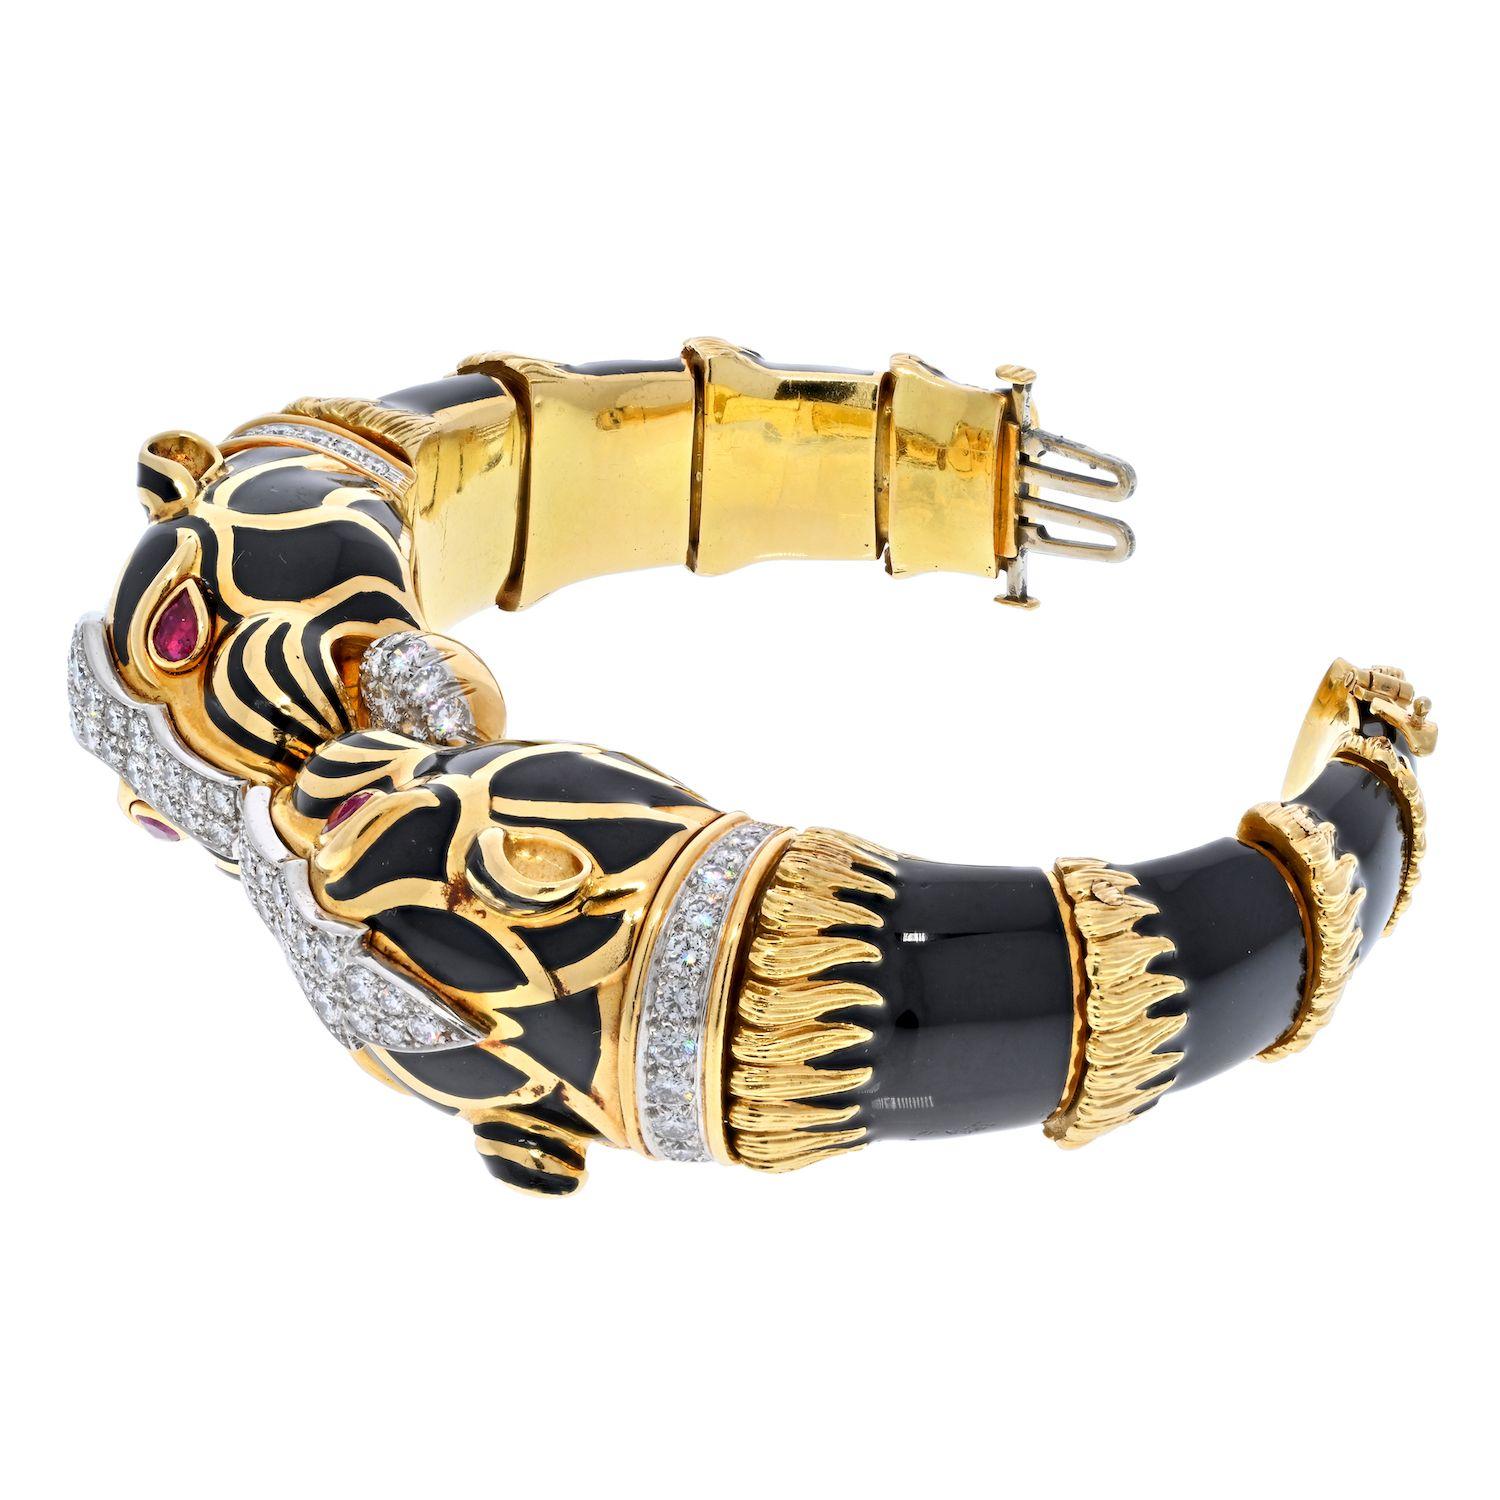 David Webb 18K Yellow Gold Black Enamel Double Head Lion Bracelet.
Wrist size: inner circumference 16.0 cm (6 ¼ in)
Designed as an articulated hinged bangle, the two opposing black enamel panthers, with bezel-set ruby eyes and a circular-cut diamond